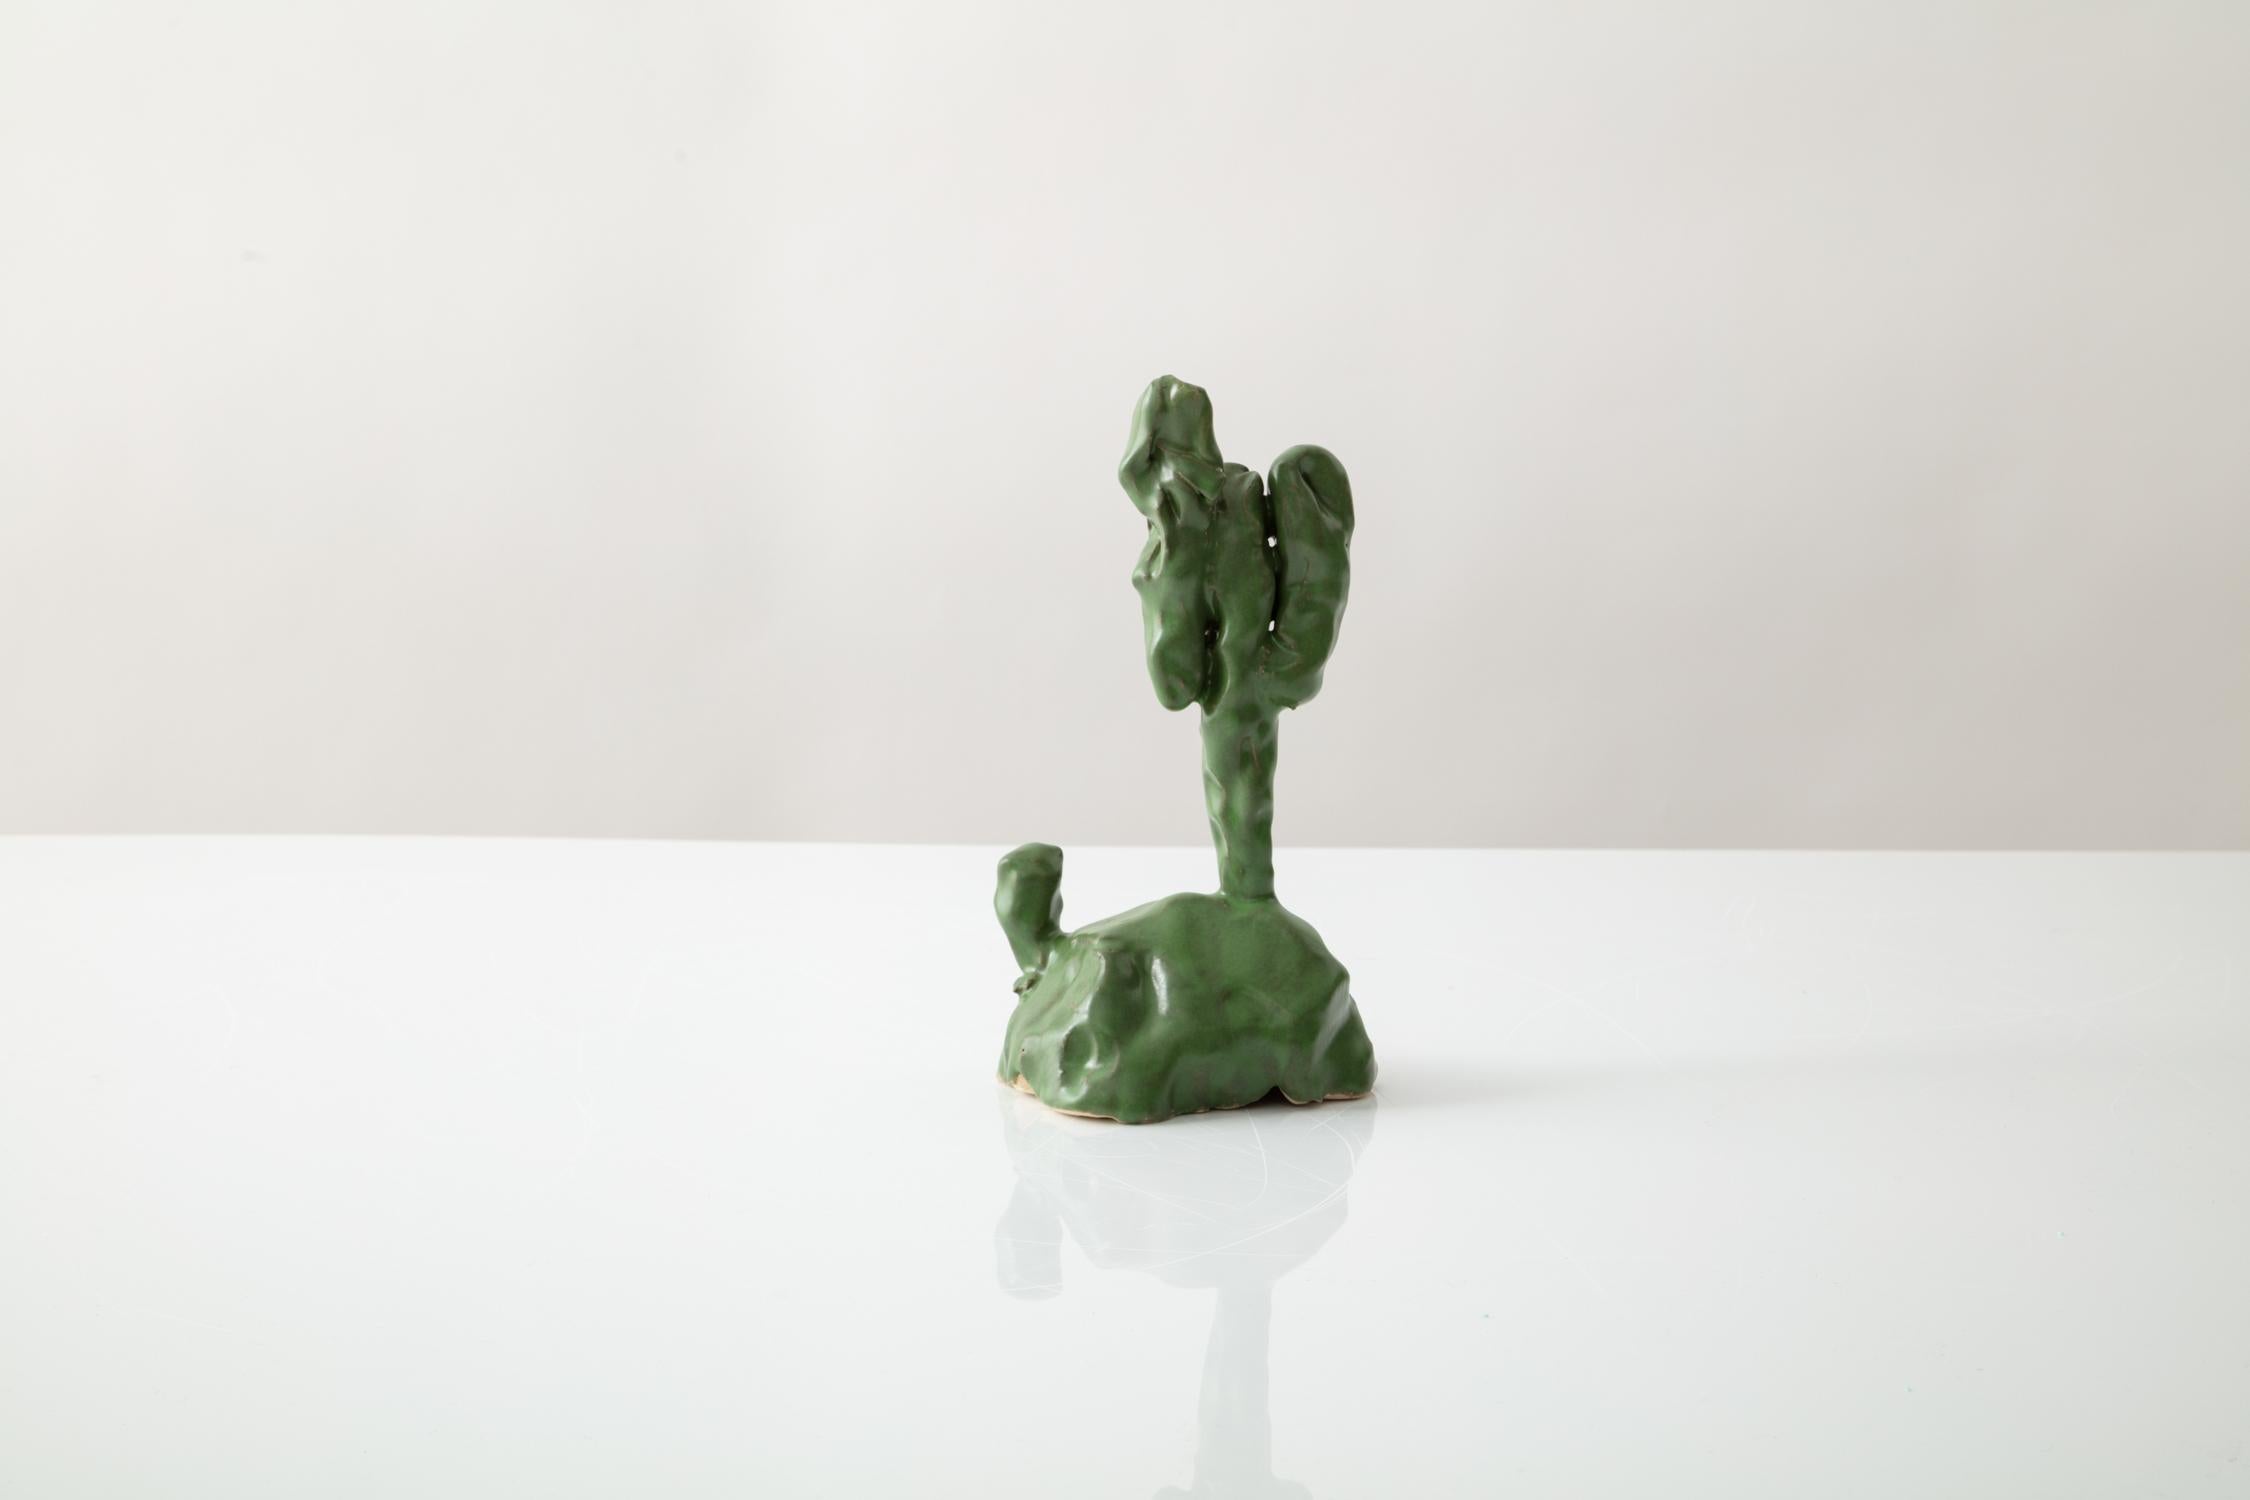 Keith Simpson rather instinctively made ceramic cacti for the show. They were a last minute thought that evolved out of a daydream. Keith was musing about the possibility of moving to the desert and found himself thinking about large, friendly,